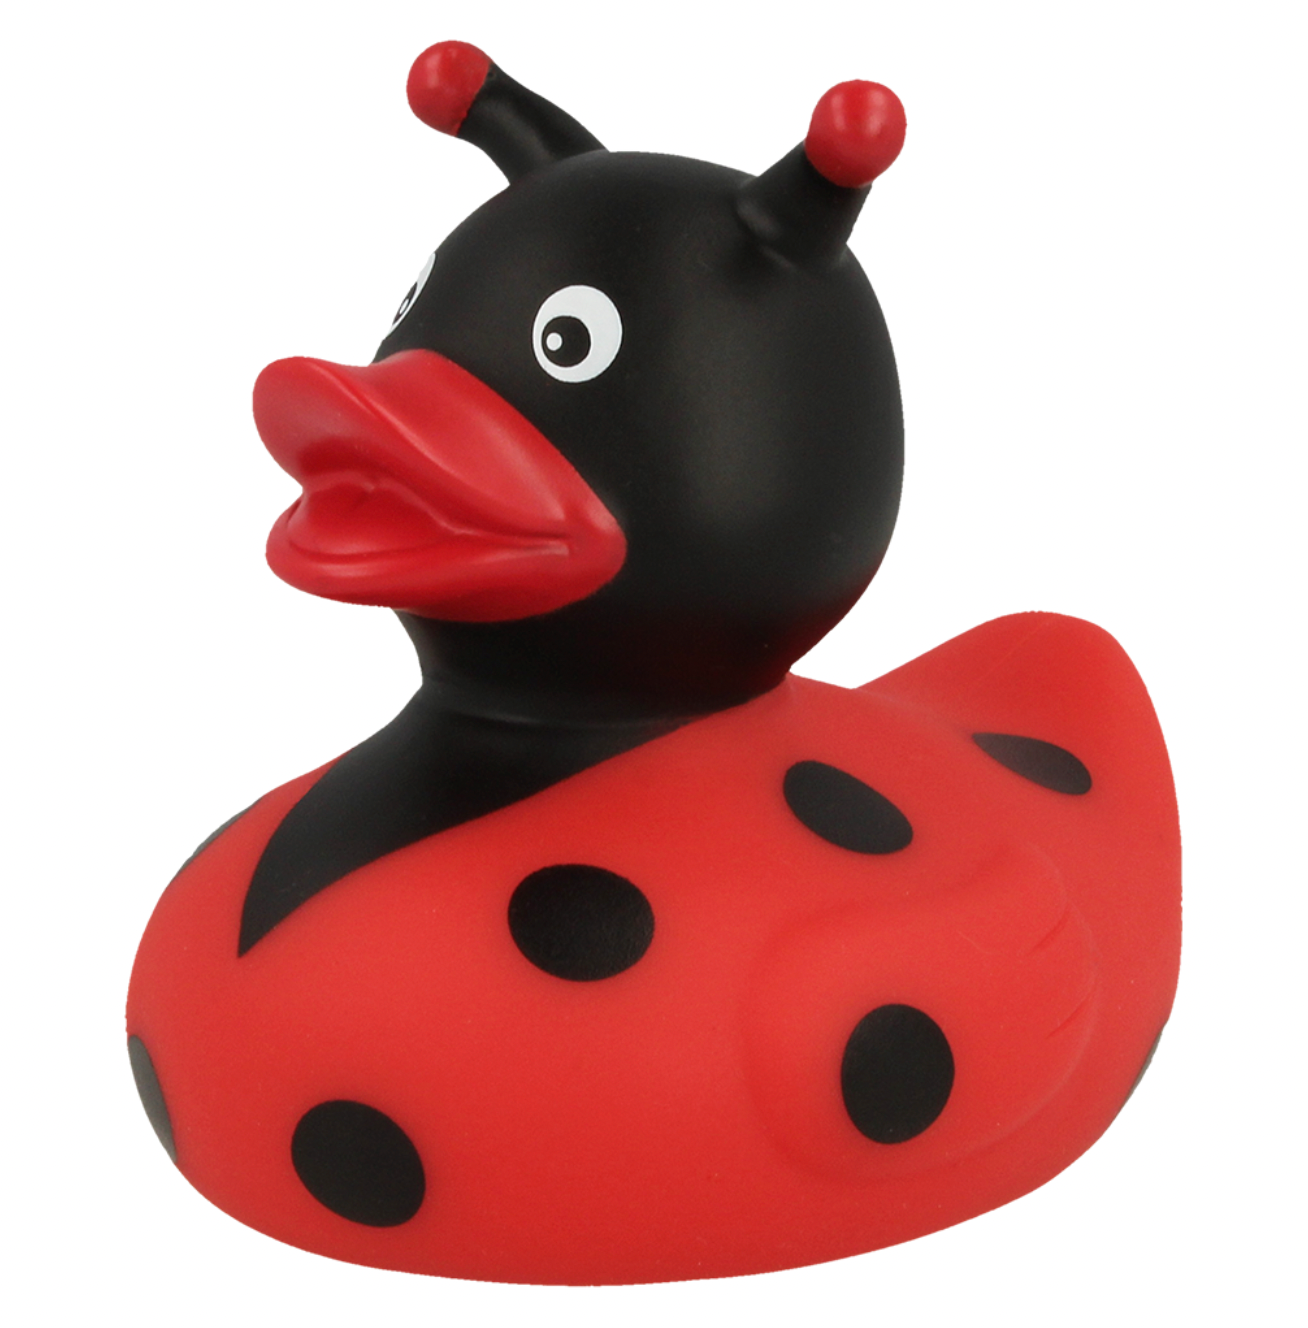 Ladybug Rubber Duck Limited Edition